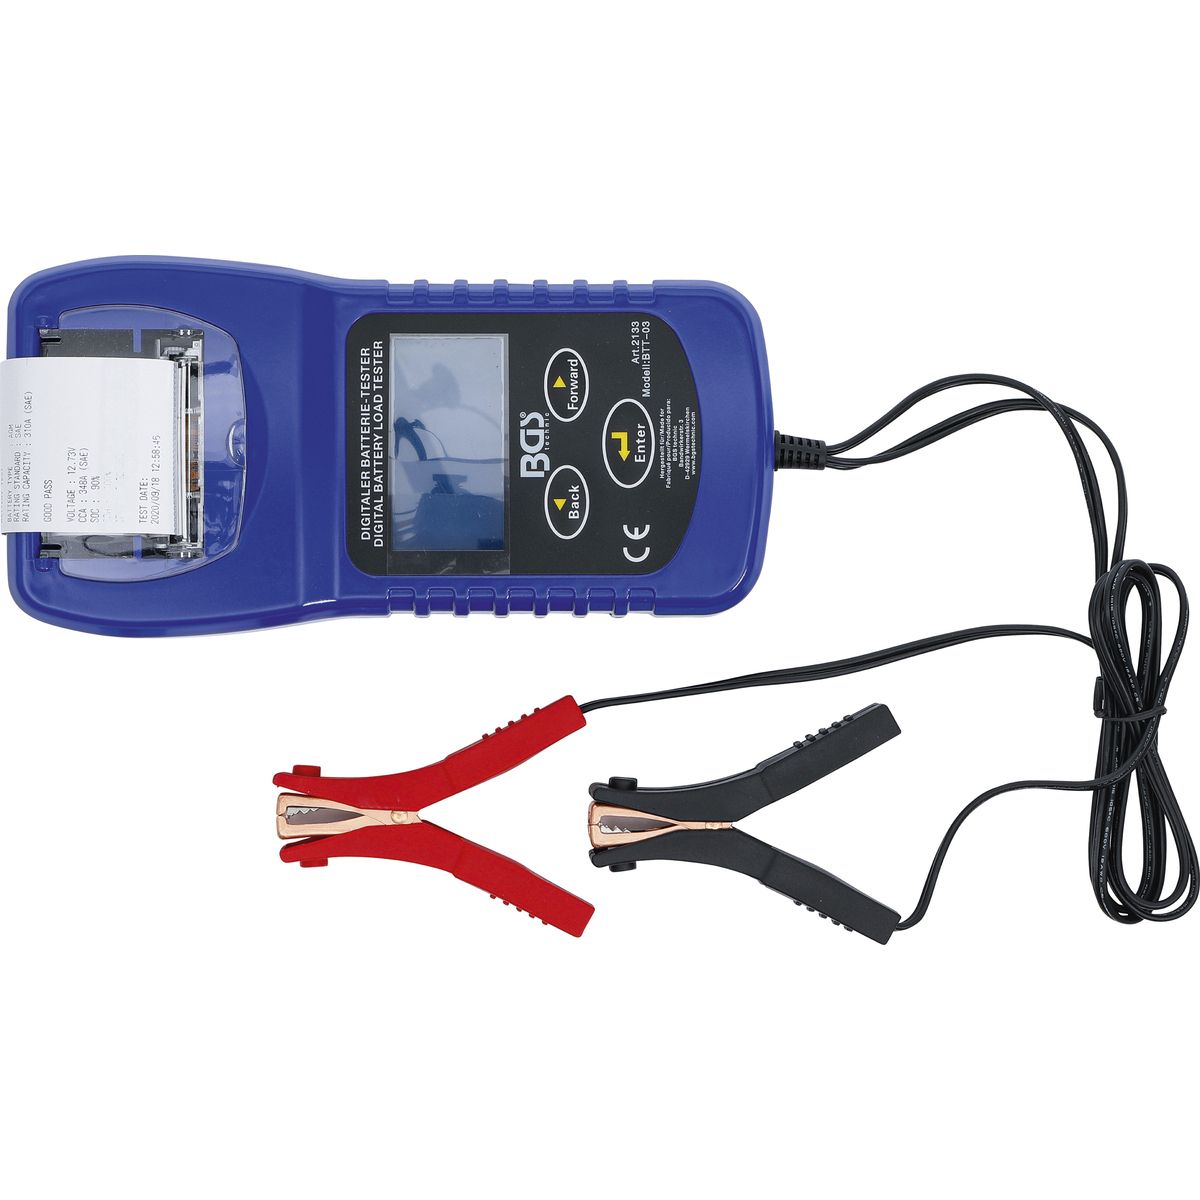 Digital Battery Tester and Charger System Tester | with Printer